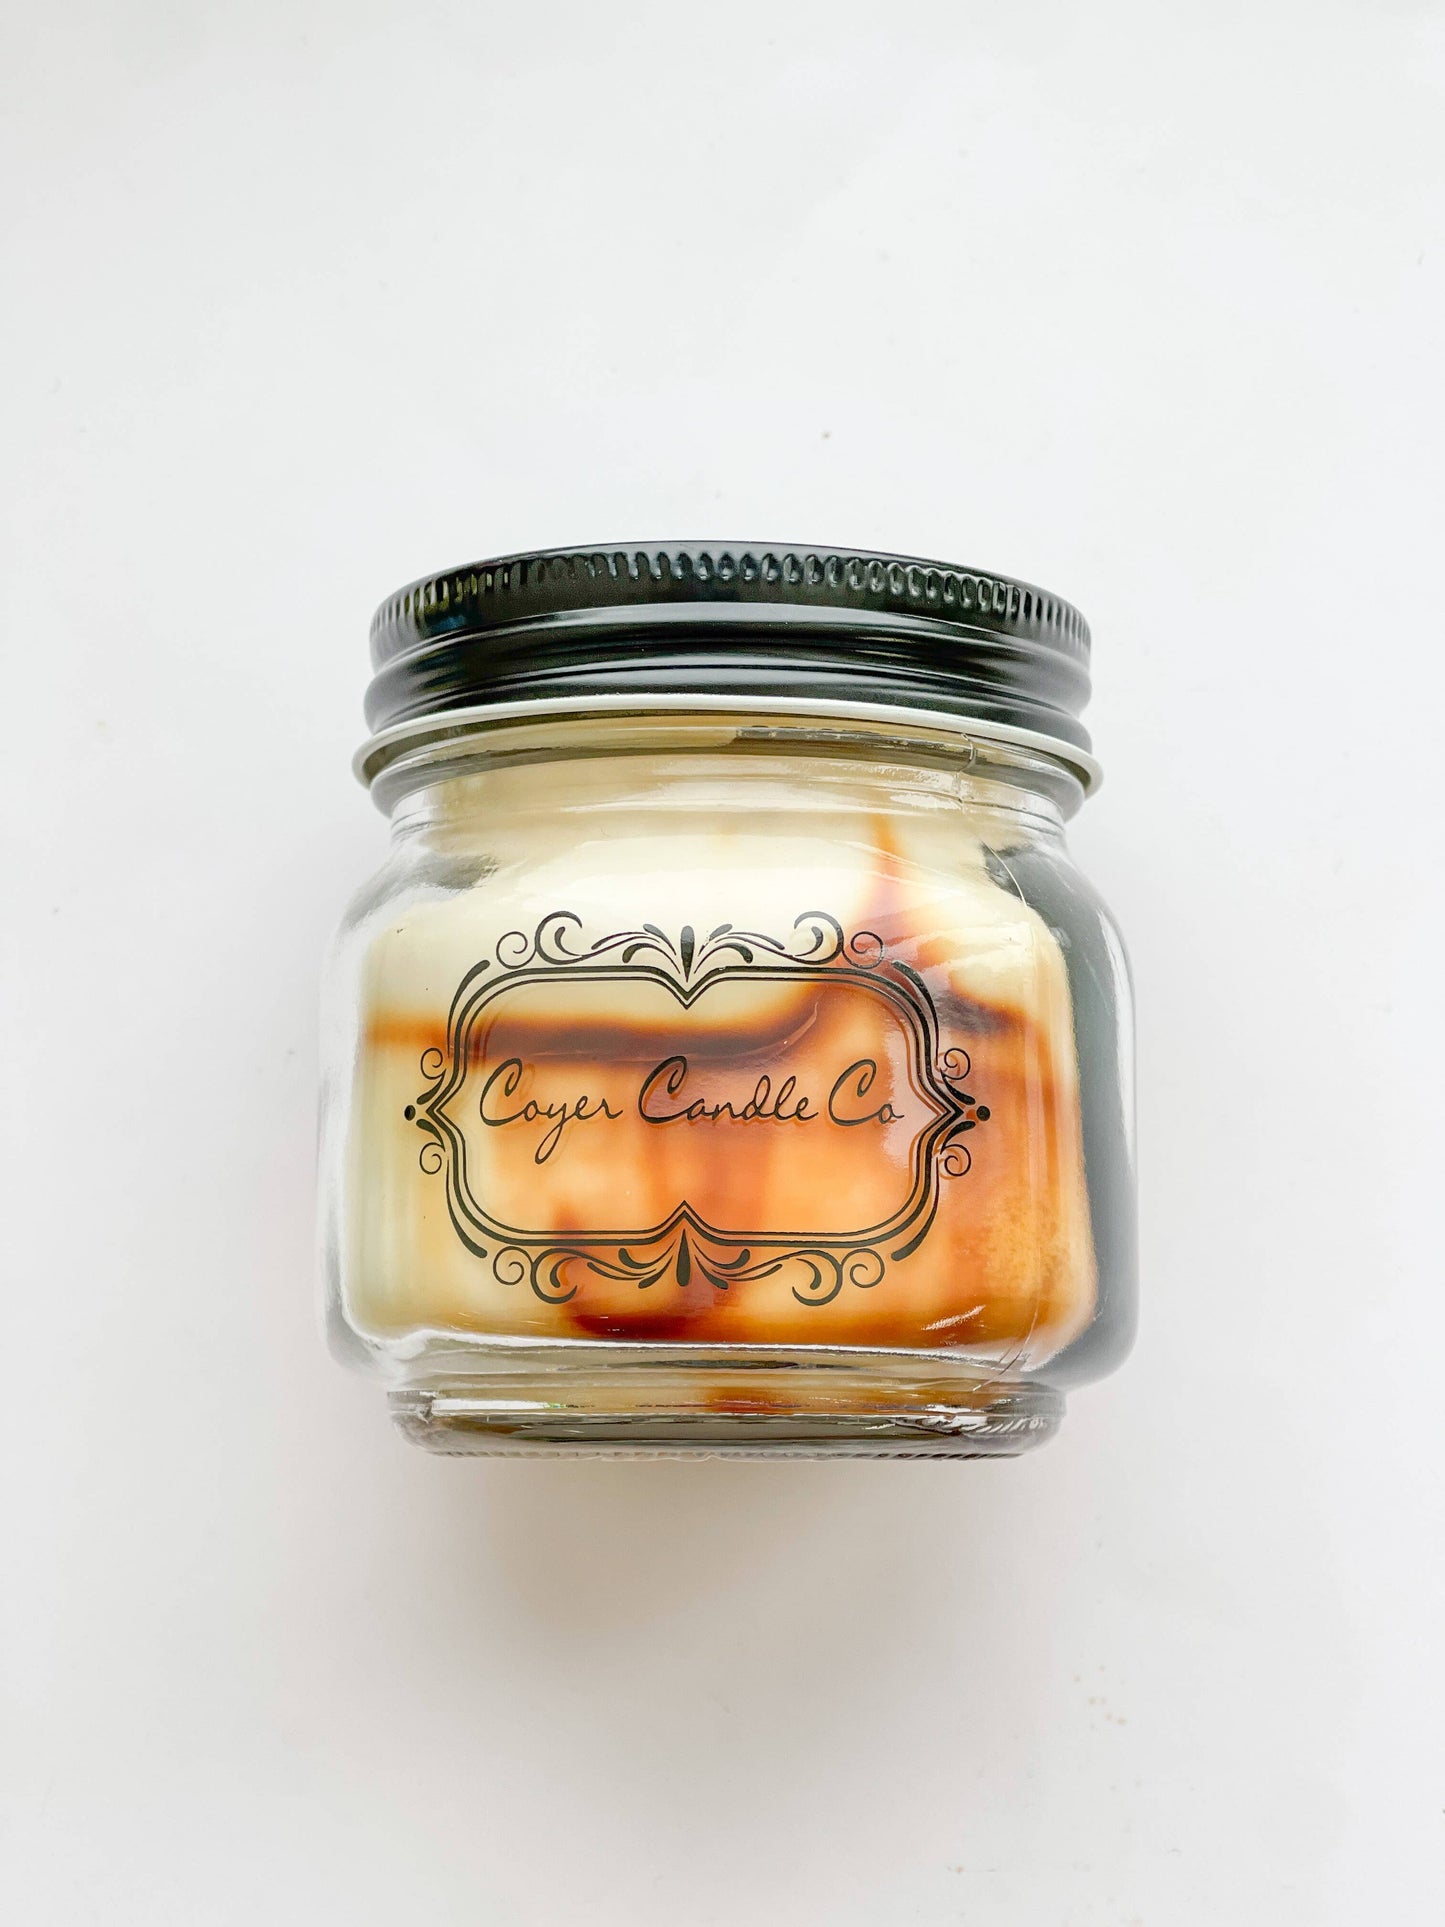 Coyer Candle Co. - 8 oz. Mason Jar Candles - Signature Collection: Choose Happiness